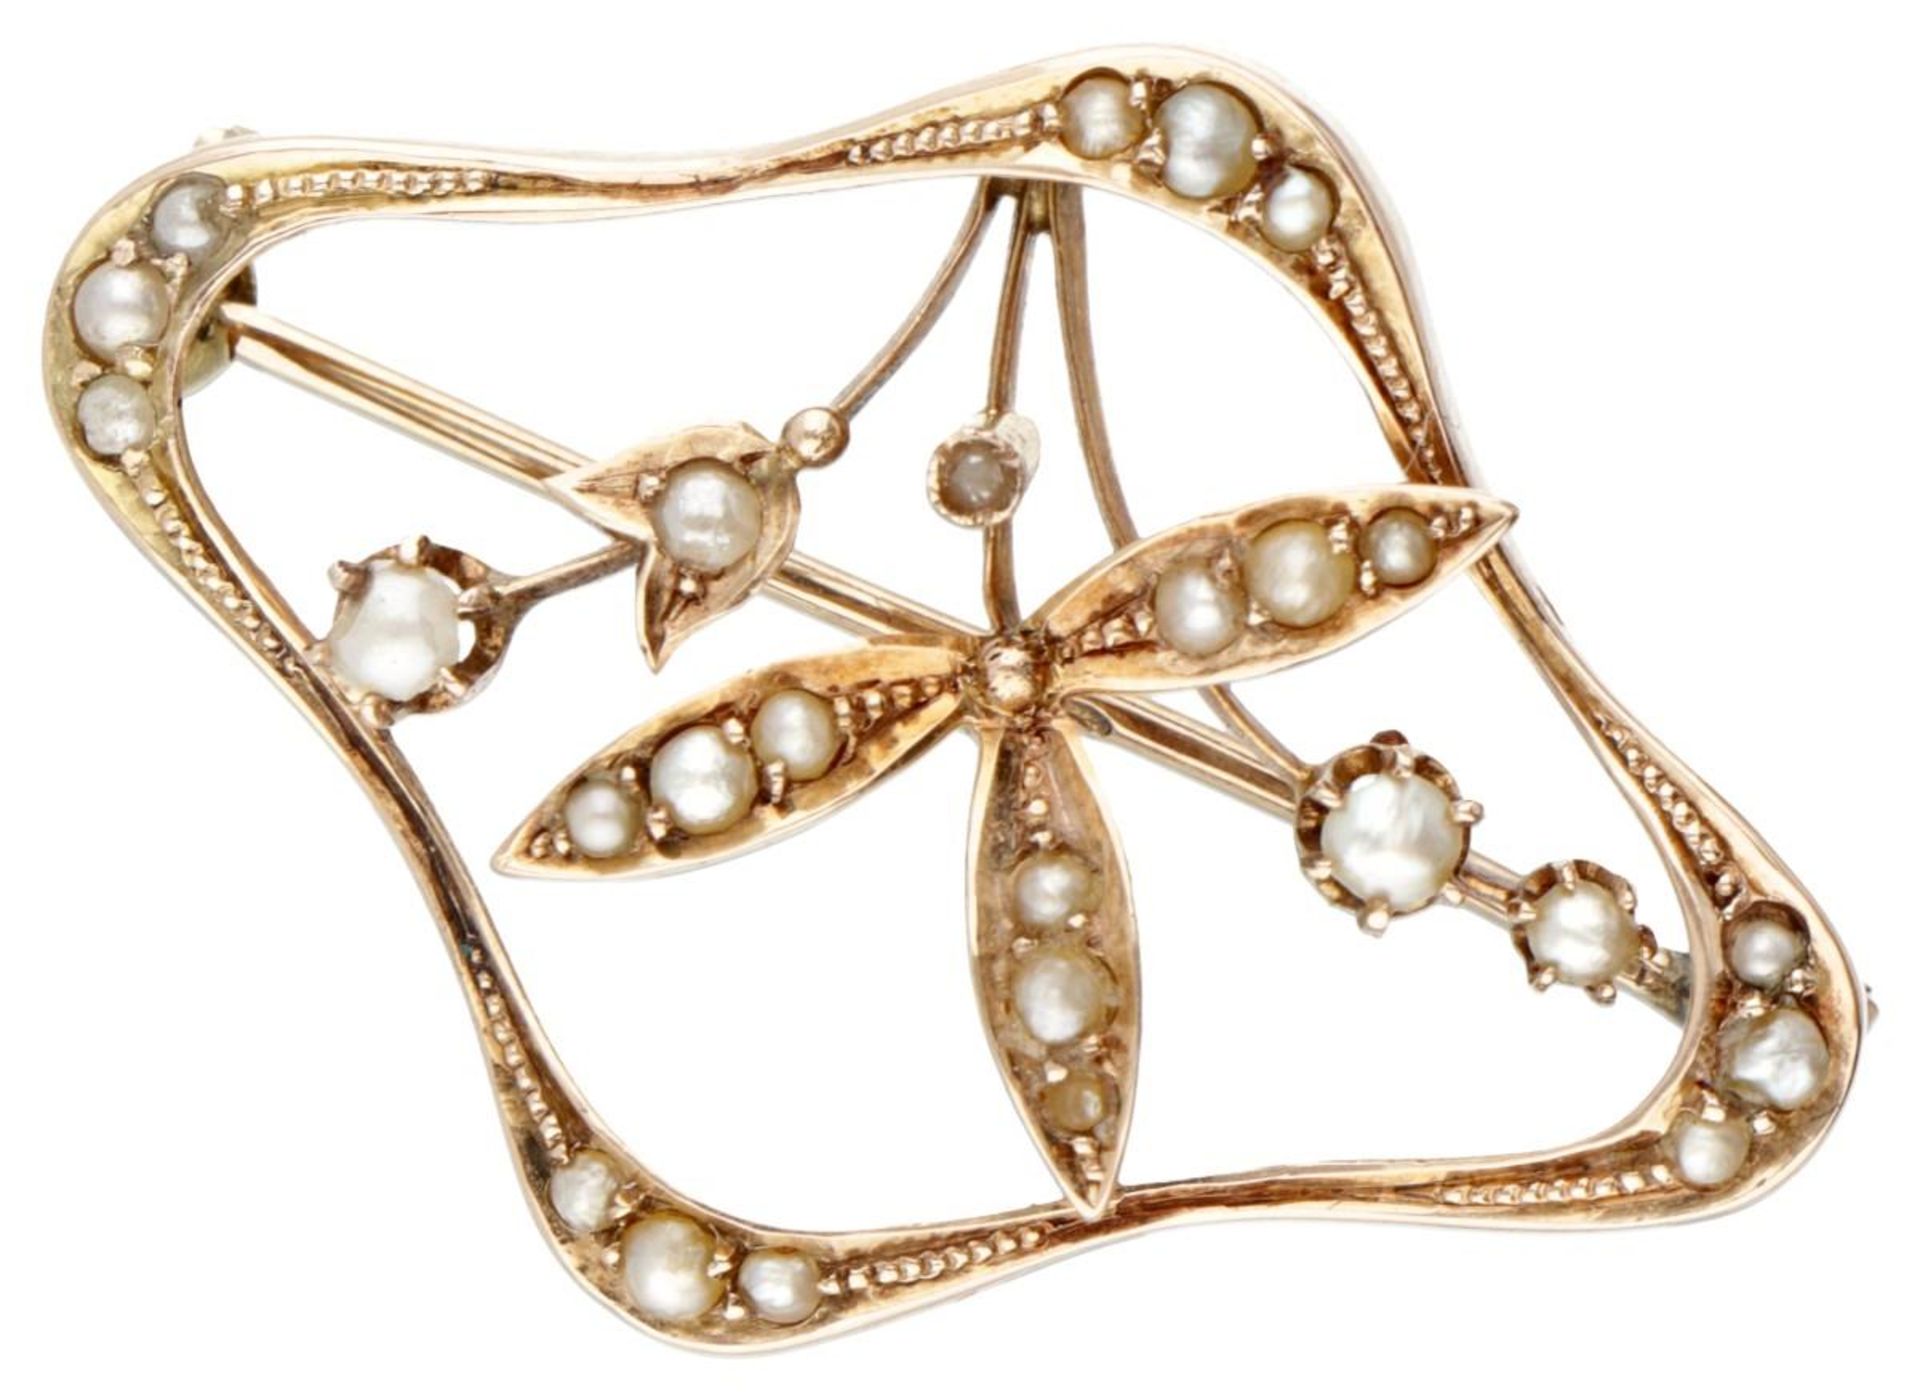 14K. Rose gold antique brooch set with seed pearls.